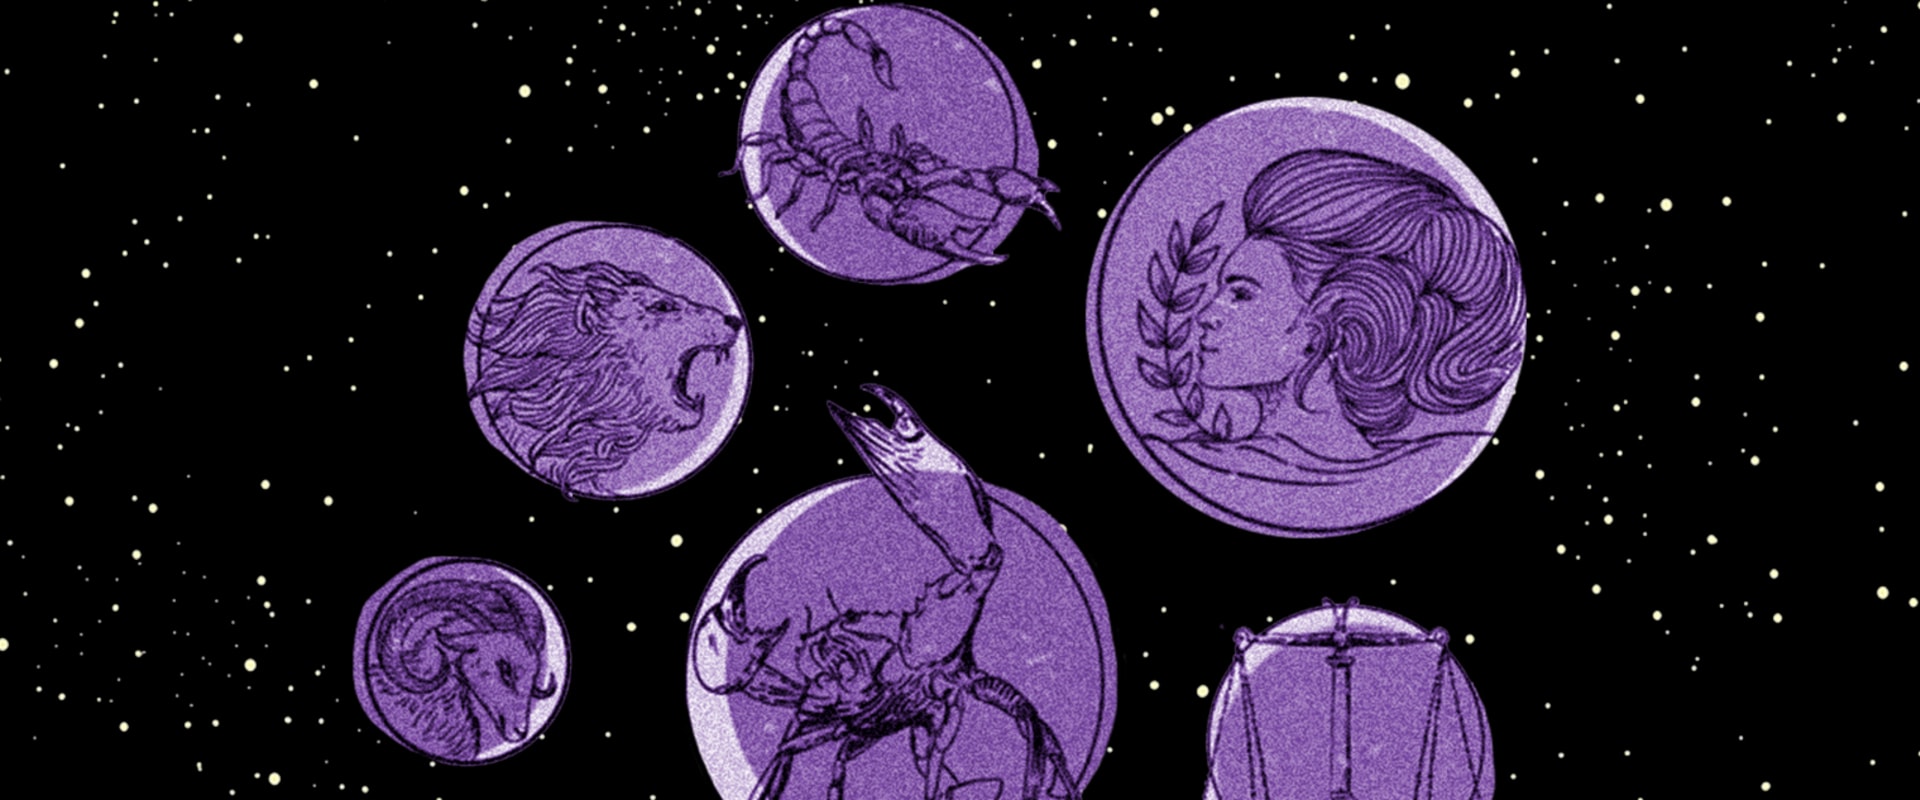 How does zodiac affect us?